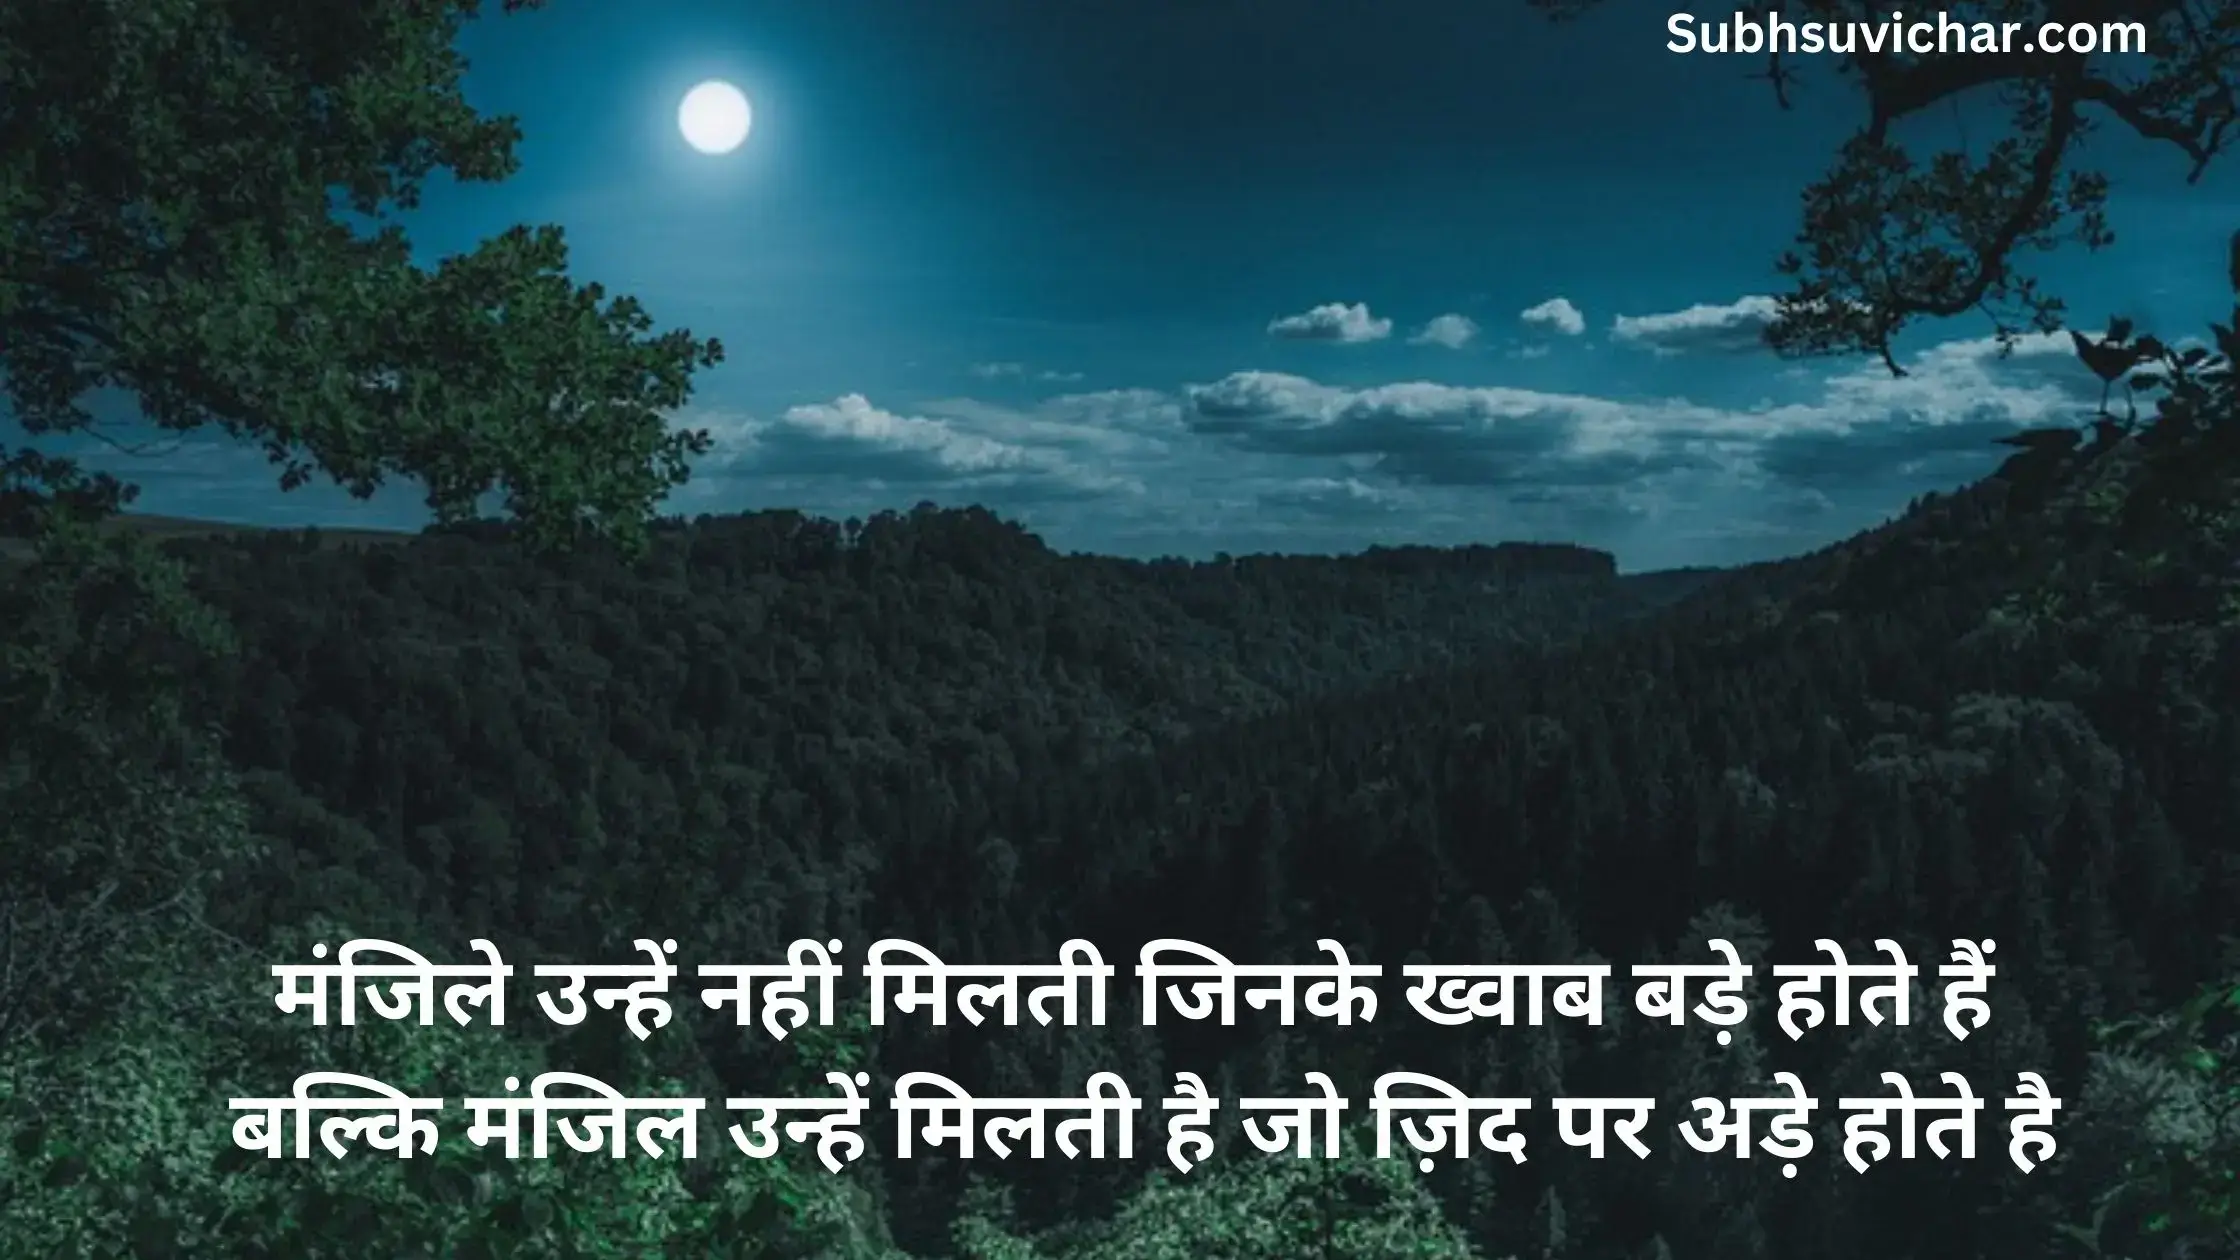 This post contains huge collection of anmol vachan shayari in hindi font with high quality images for your whatsaap and facebook status.